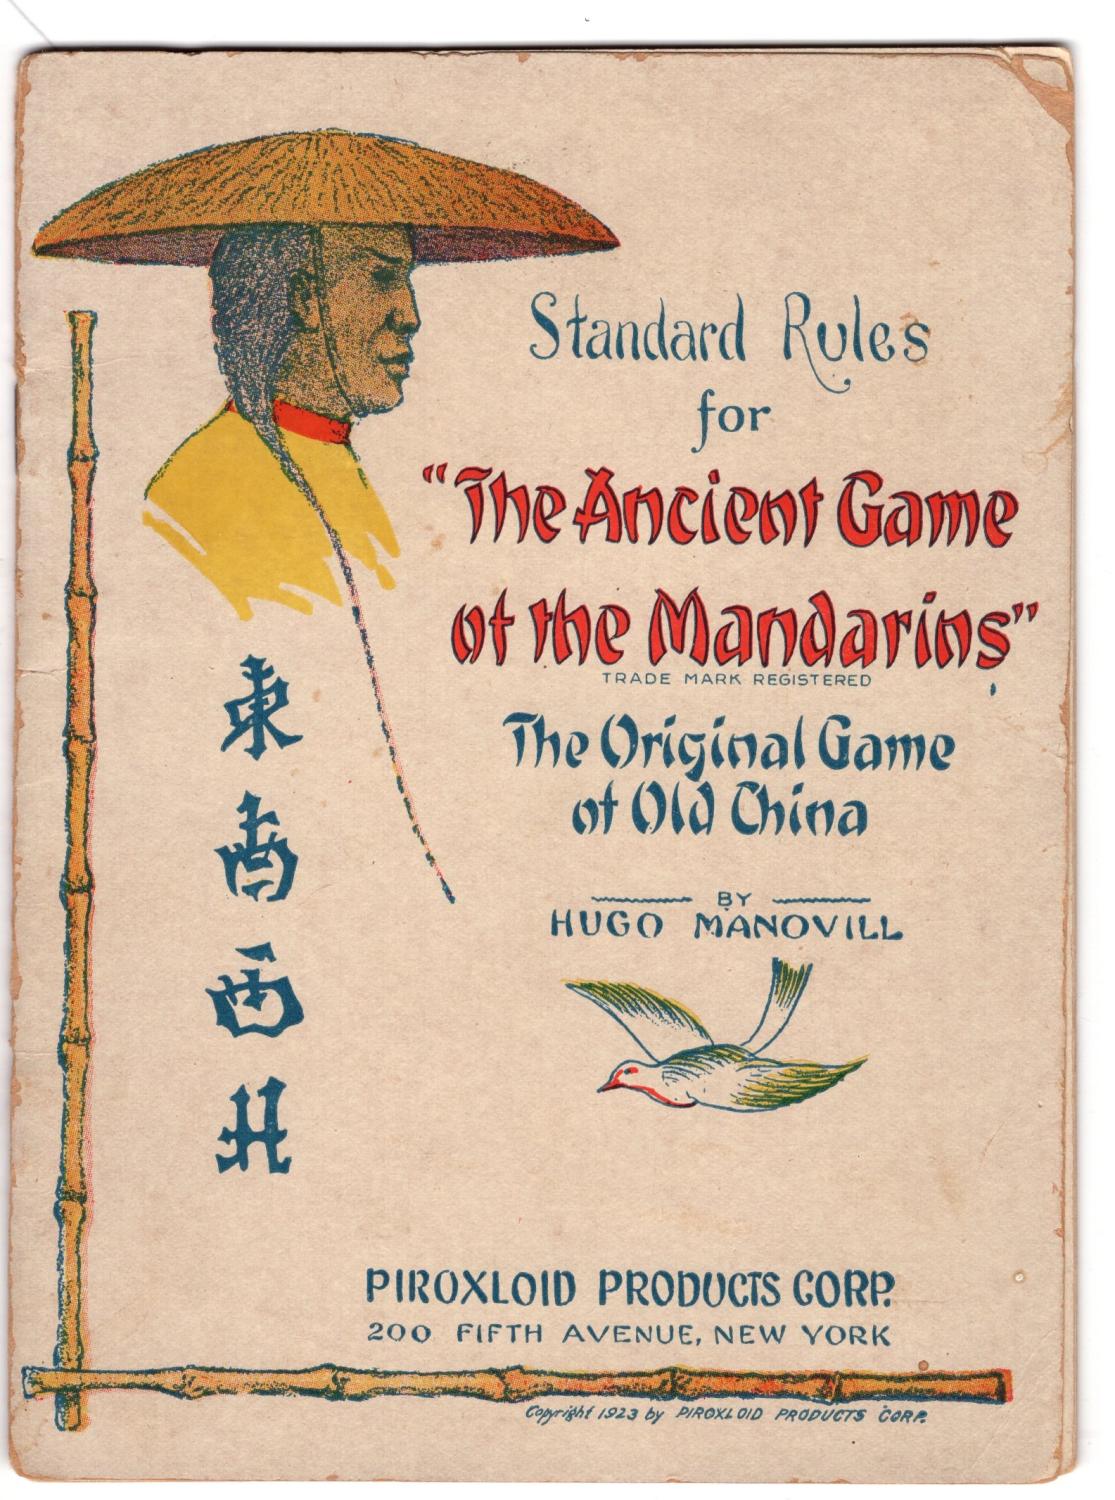 The Ancient Game of the Mandarins